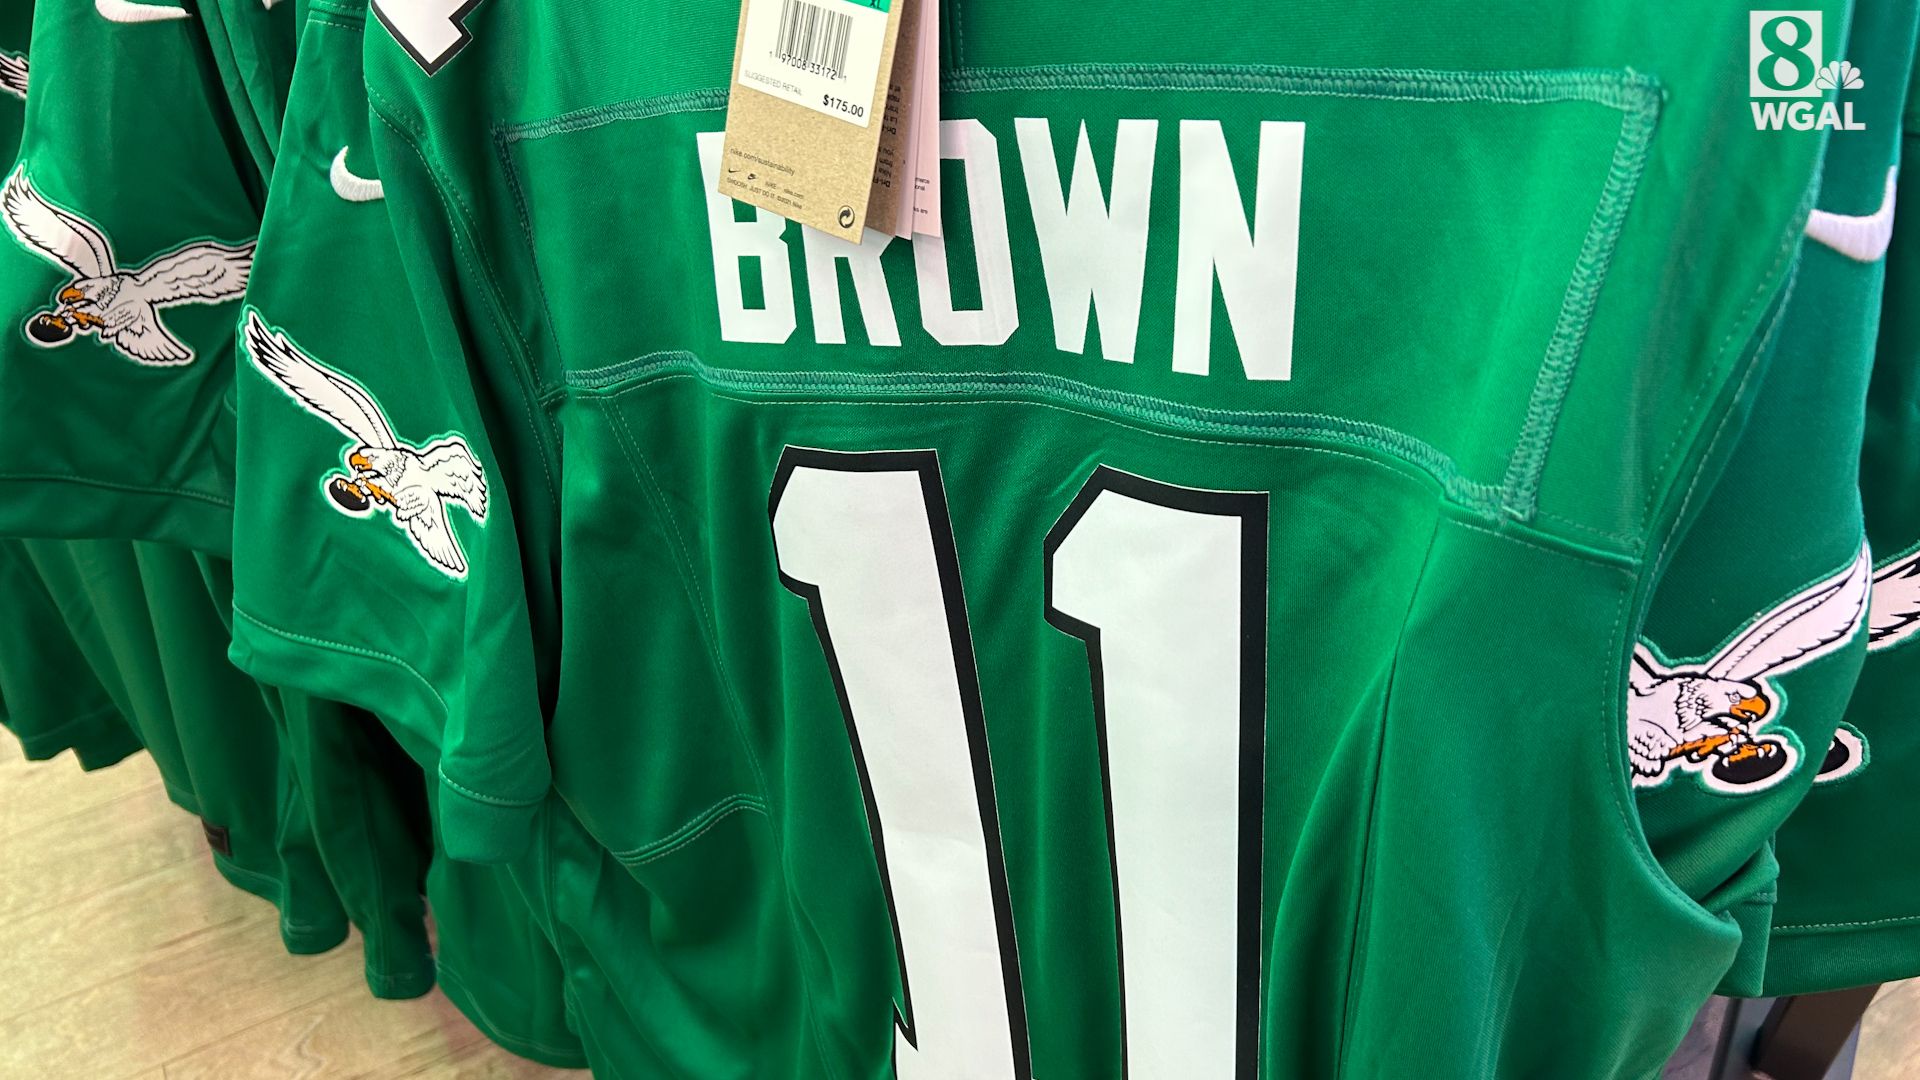 Will we see the Eagles use their kelly green and black jerseys in 2023?